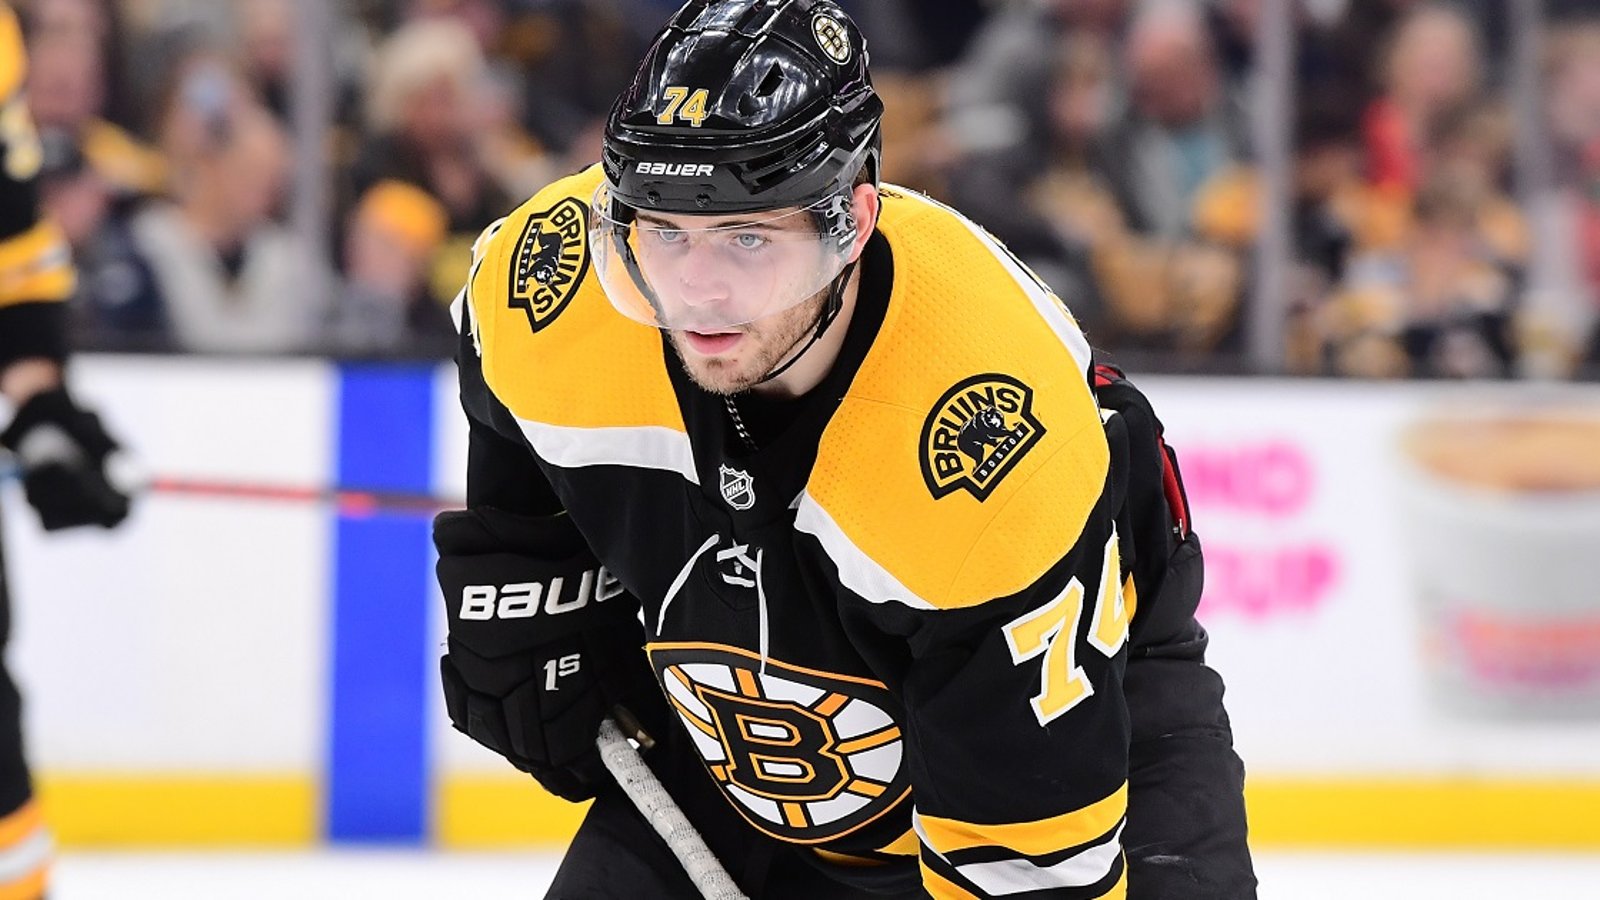 Jake DeBrusk addresses his 'haters', vows to prove them wrong.